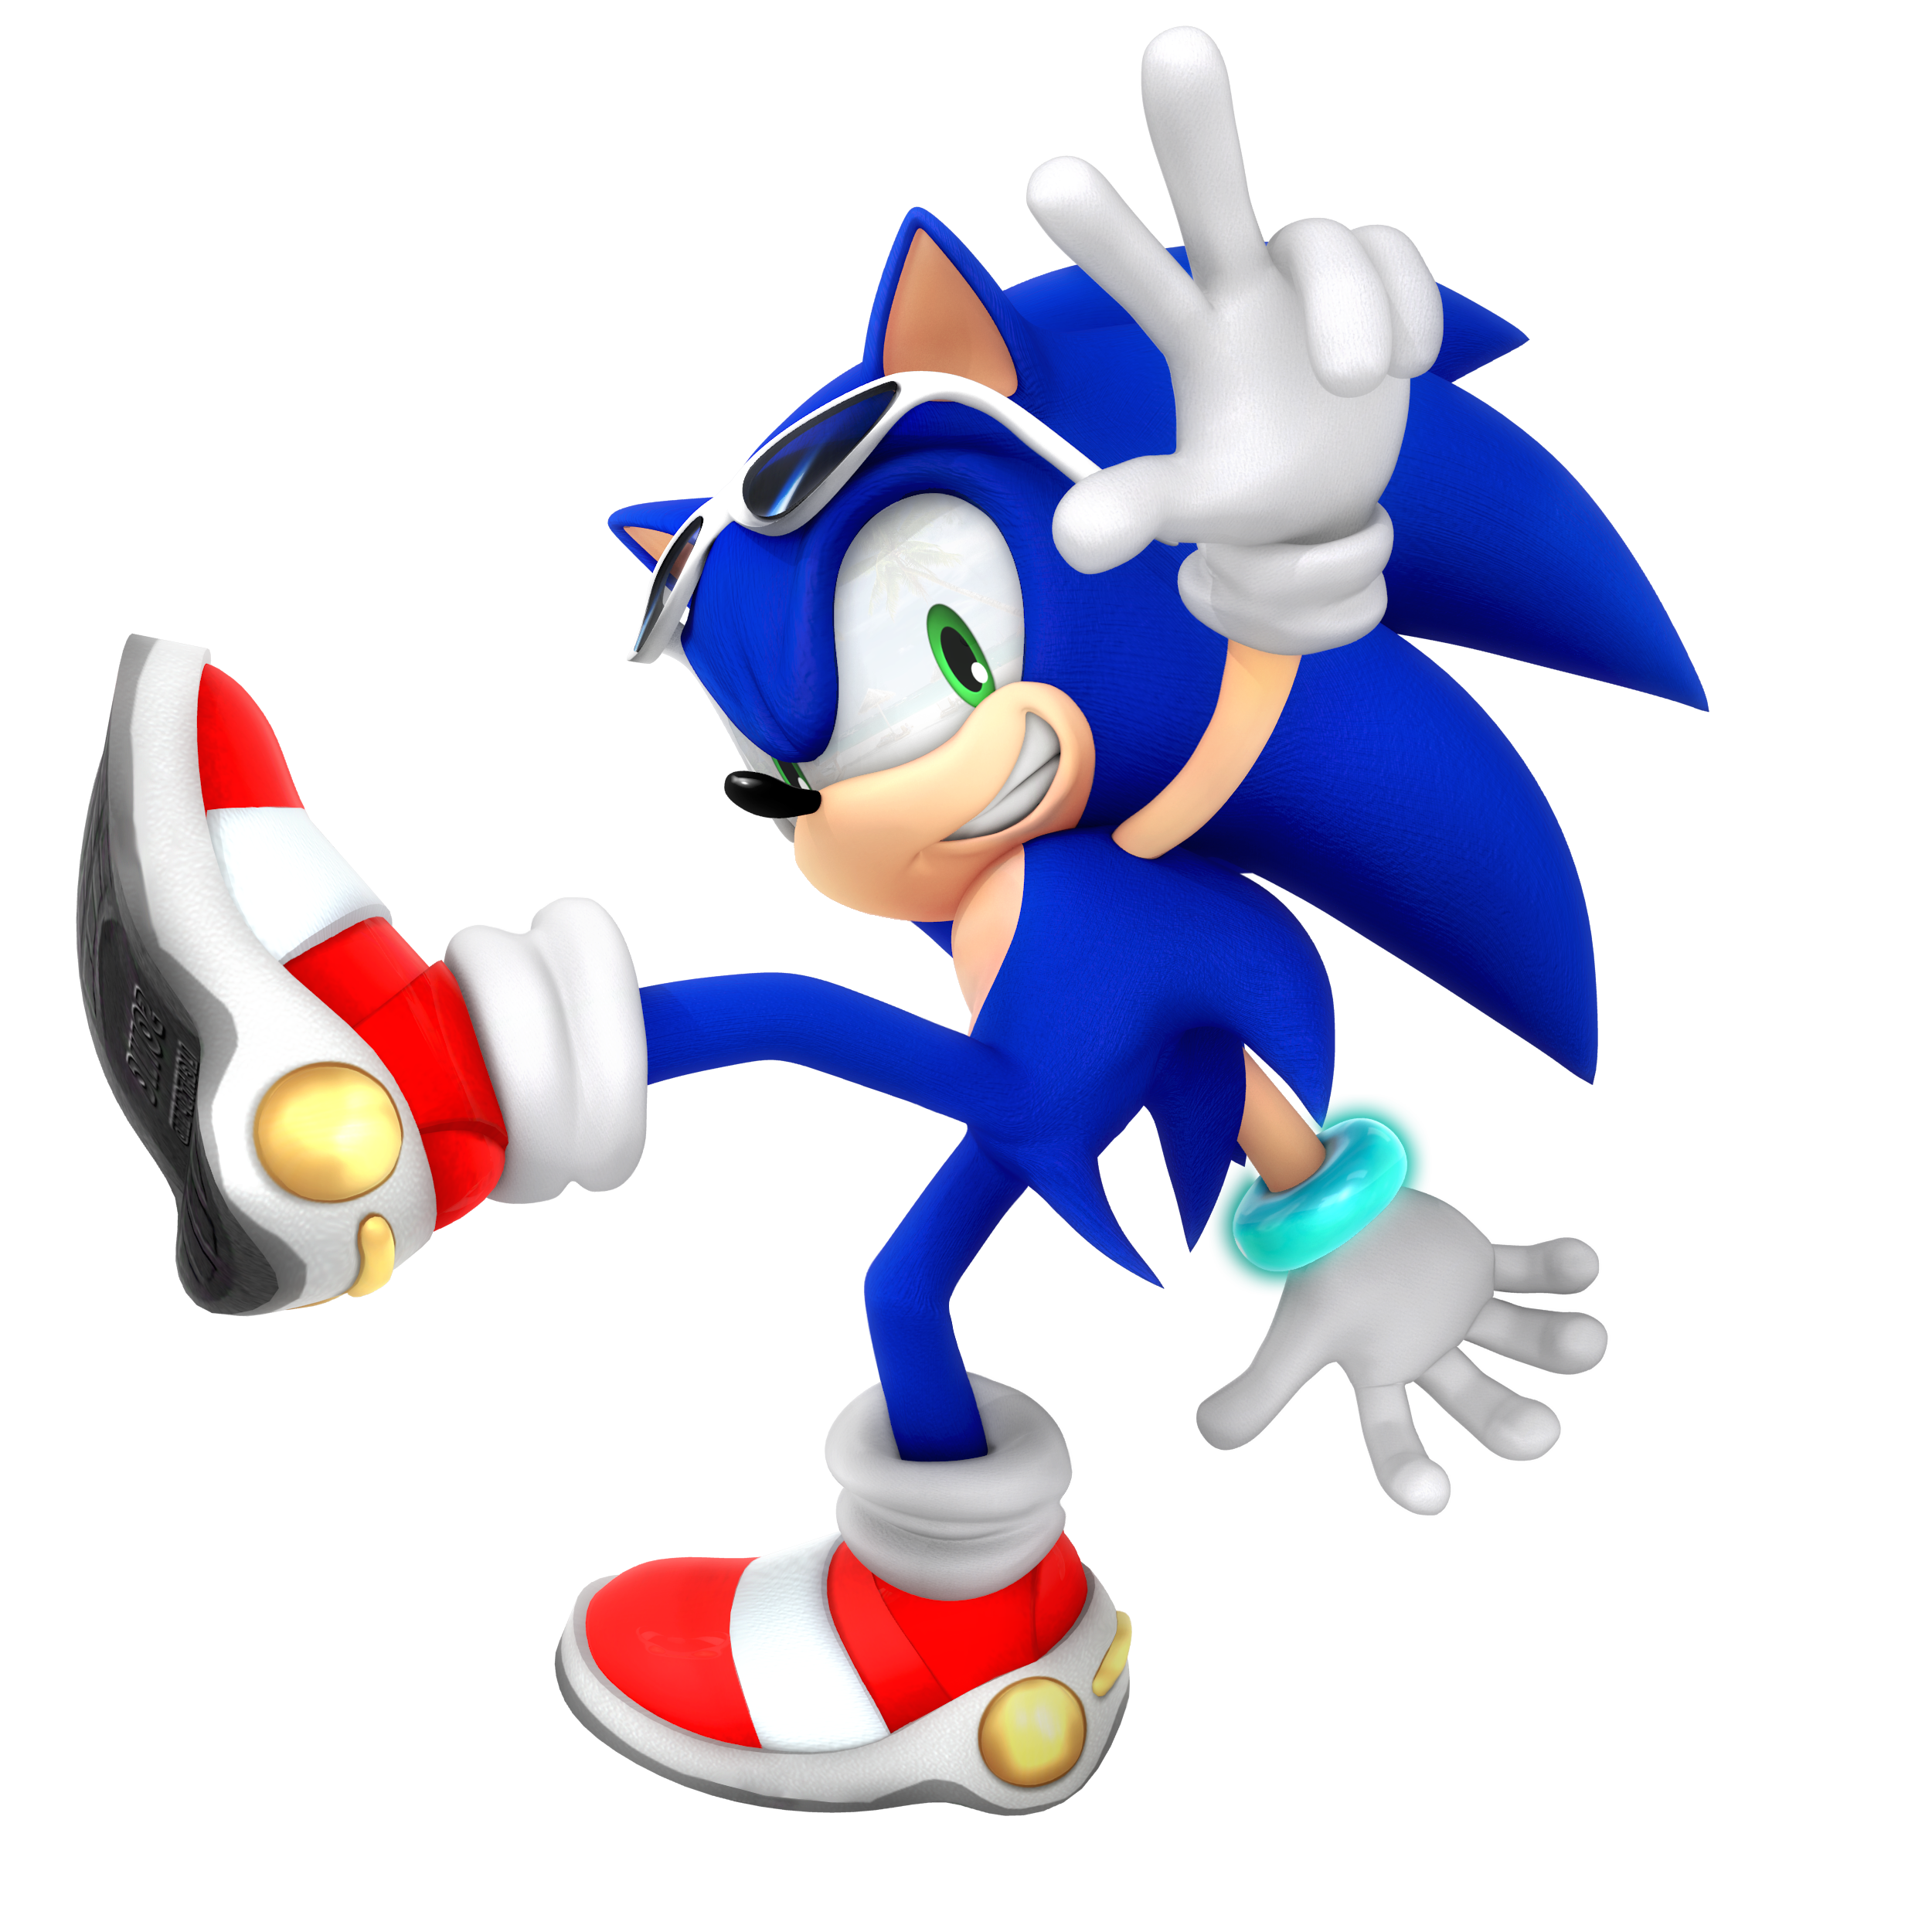 Classic Sonic Dimensional Render by Nibroc-Rock on DeviantArt